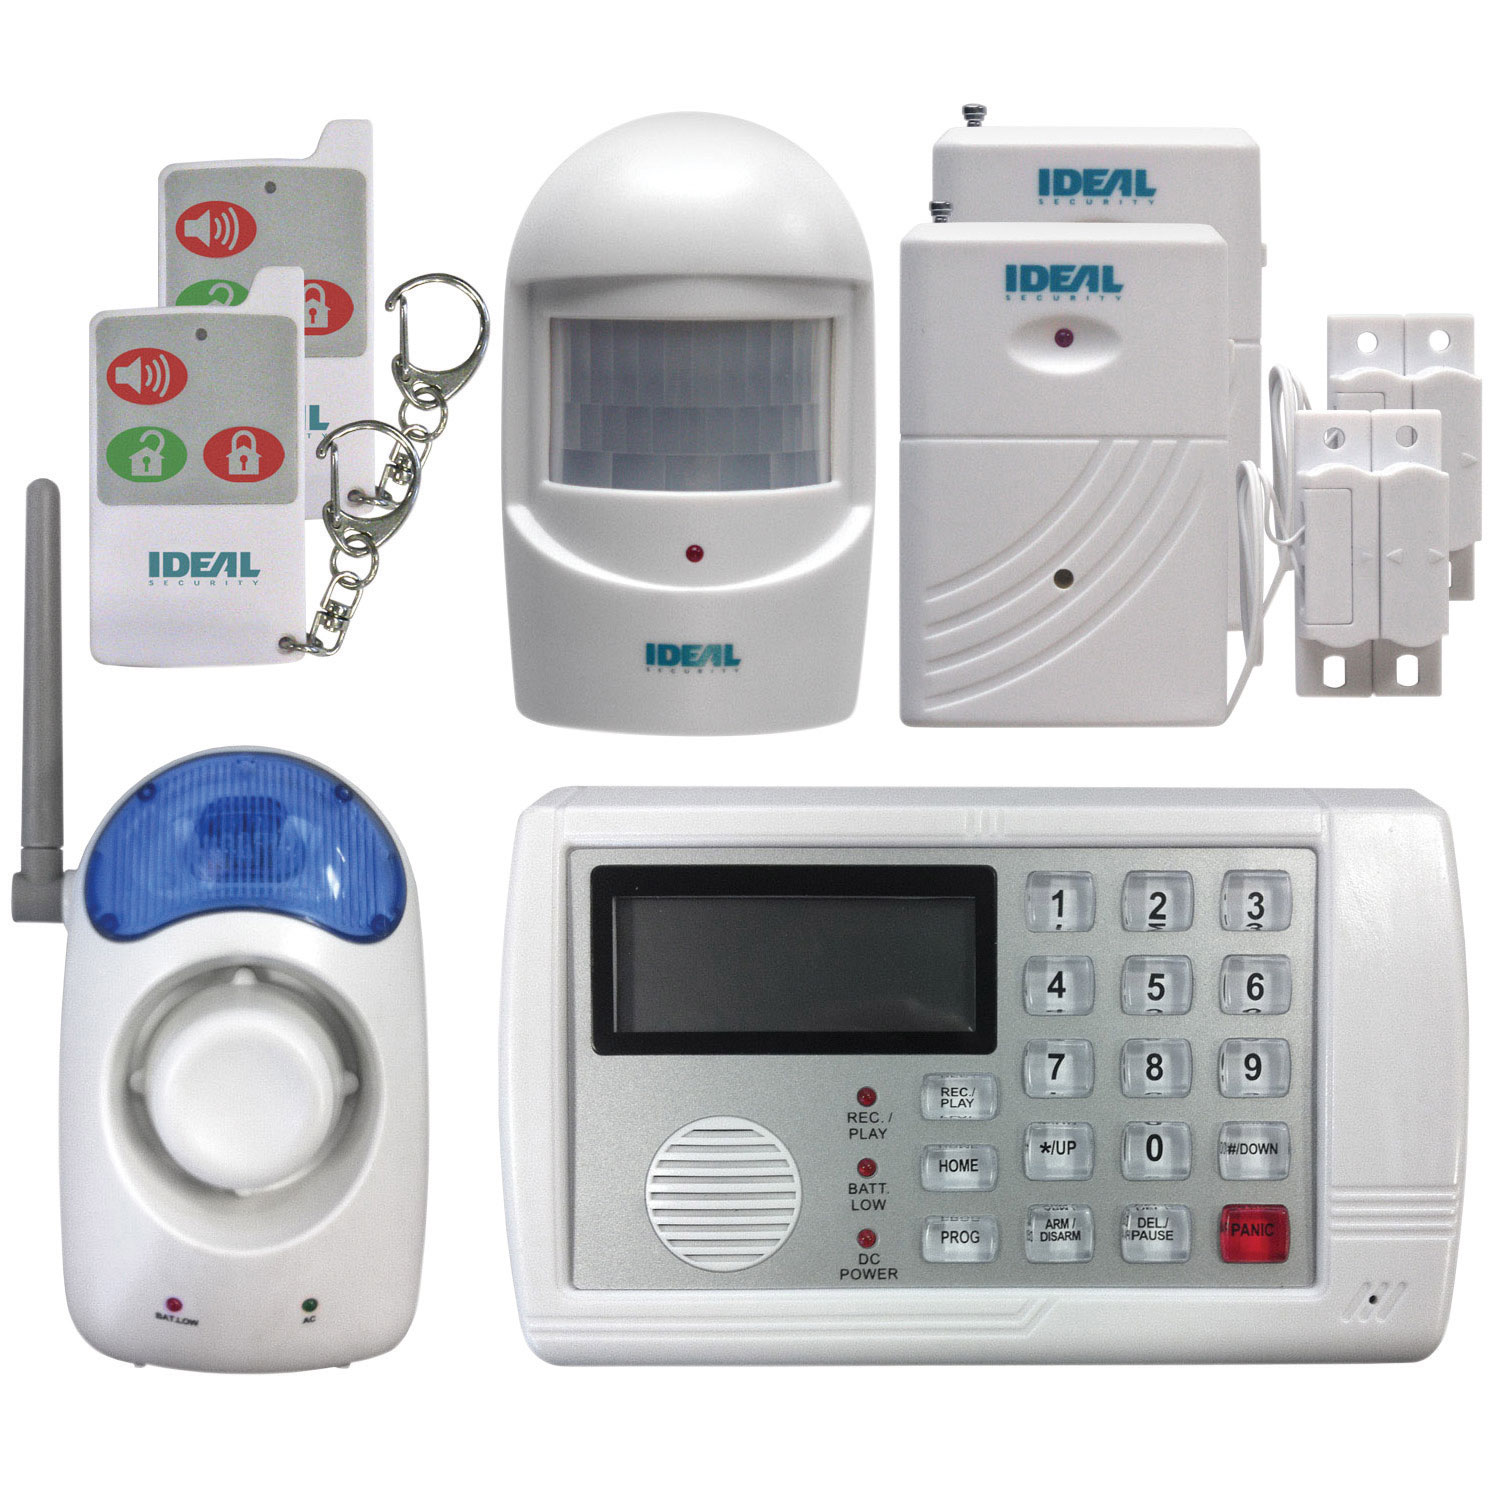 What are some highly rated remote alarm systems according to experts?